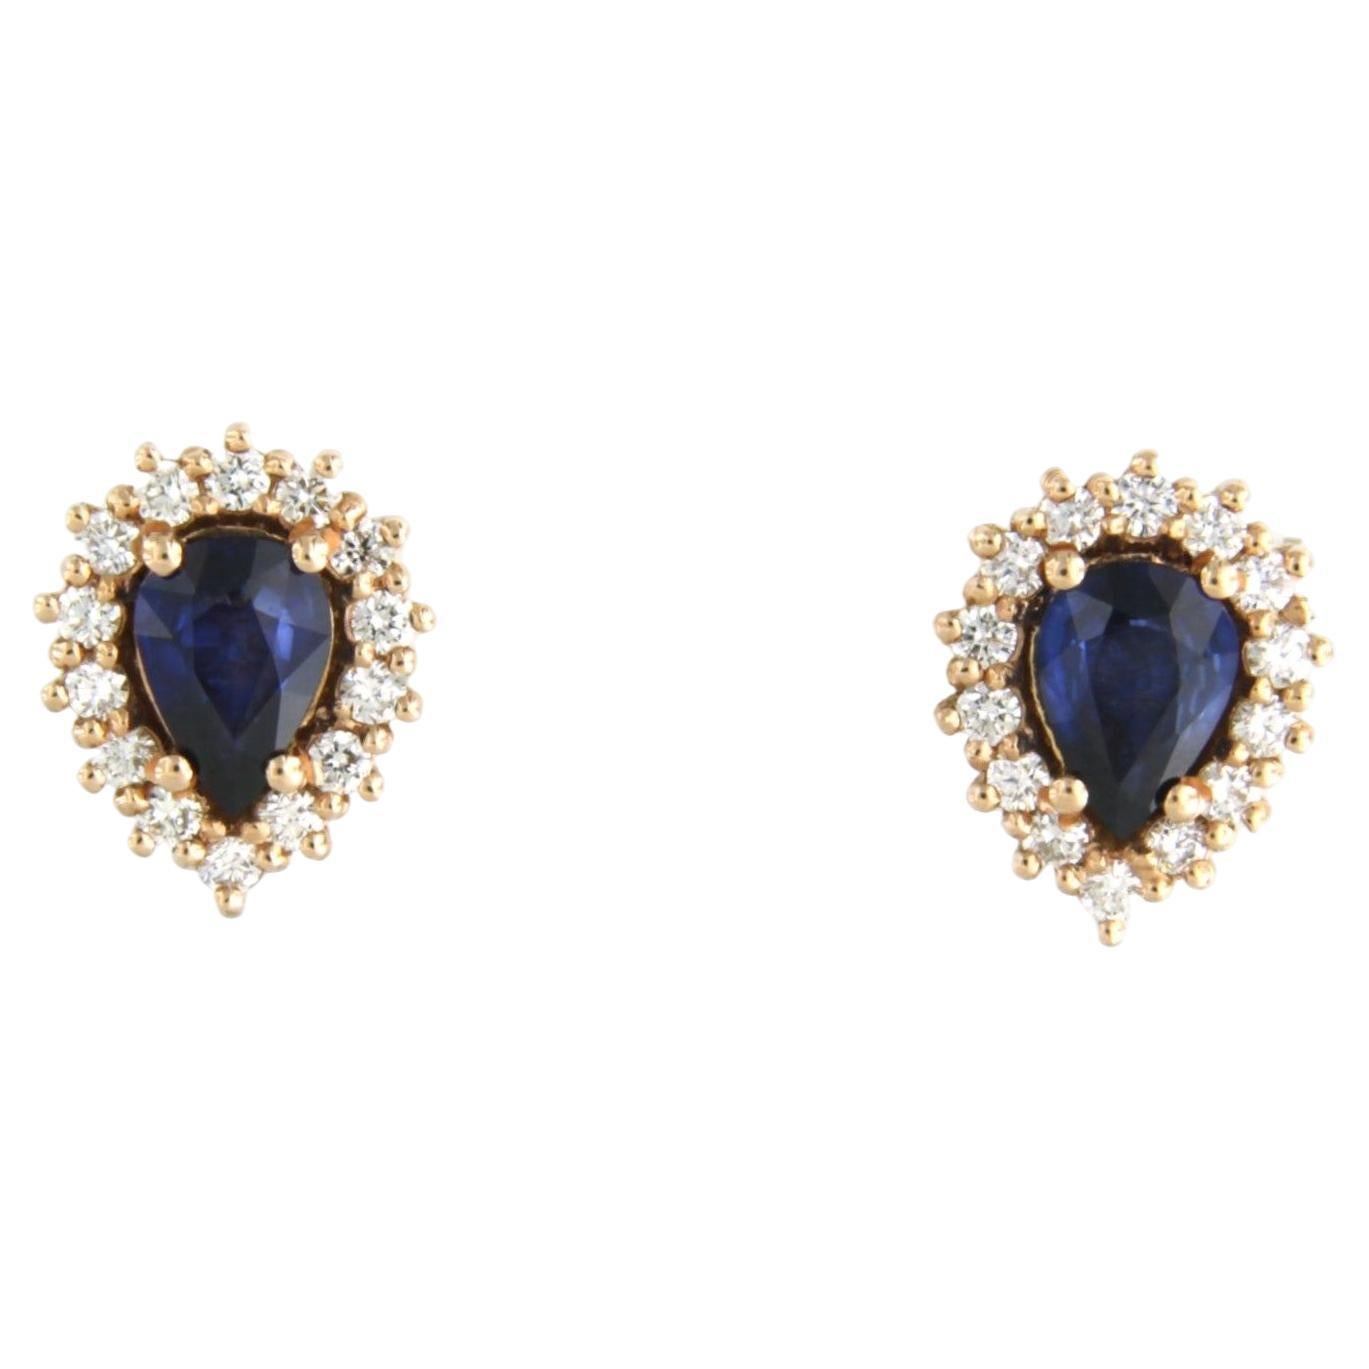 Earrings set with Sapphire and diamond 18k pink gold